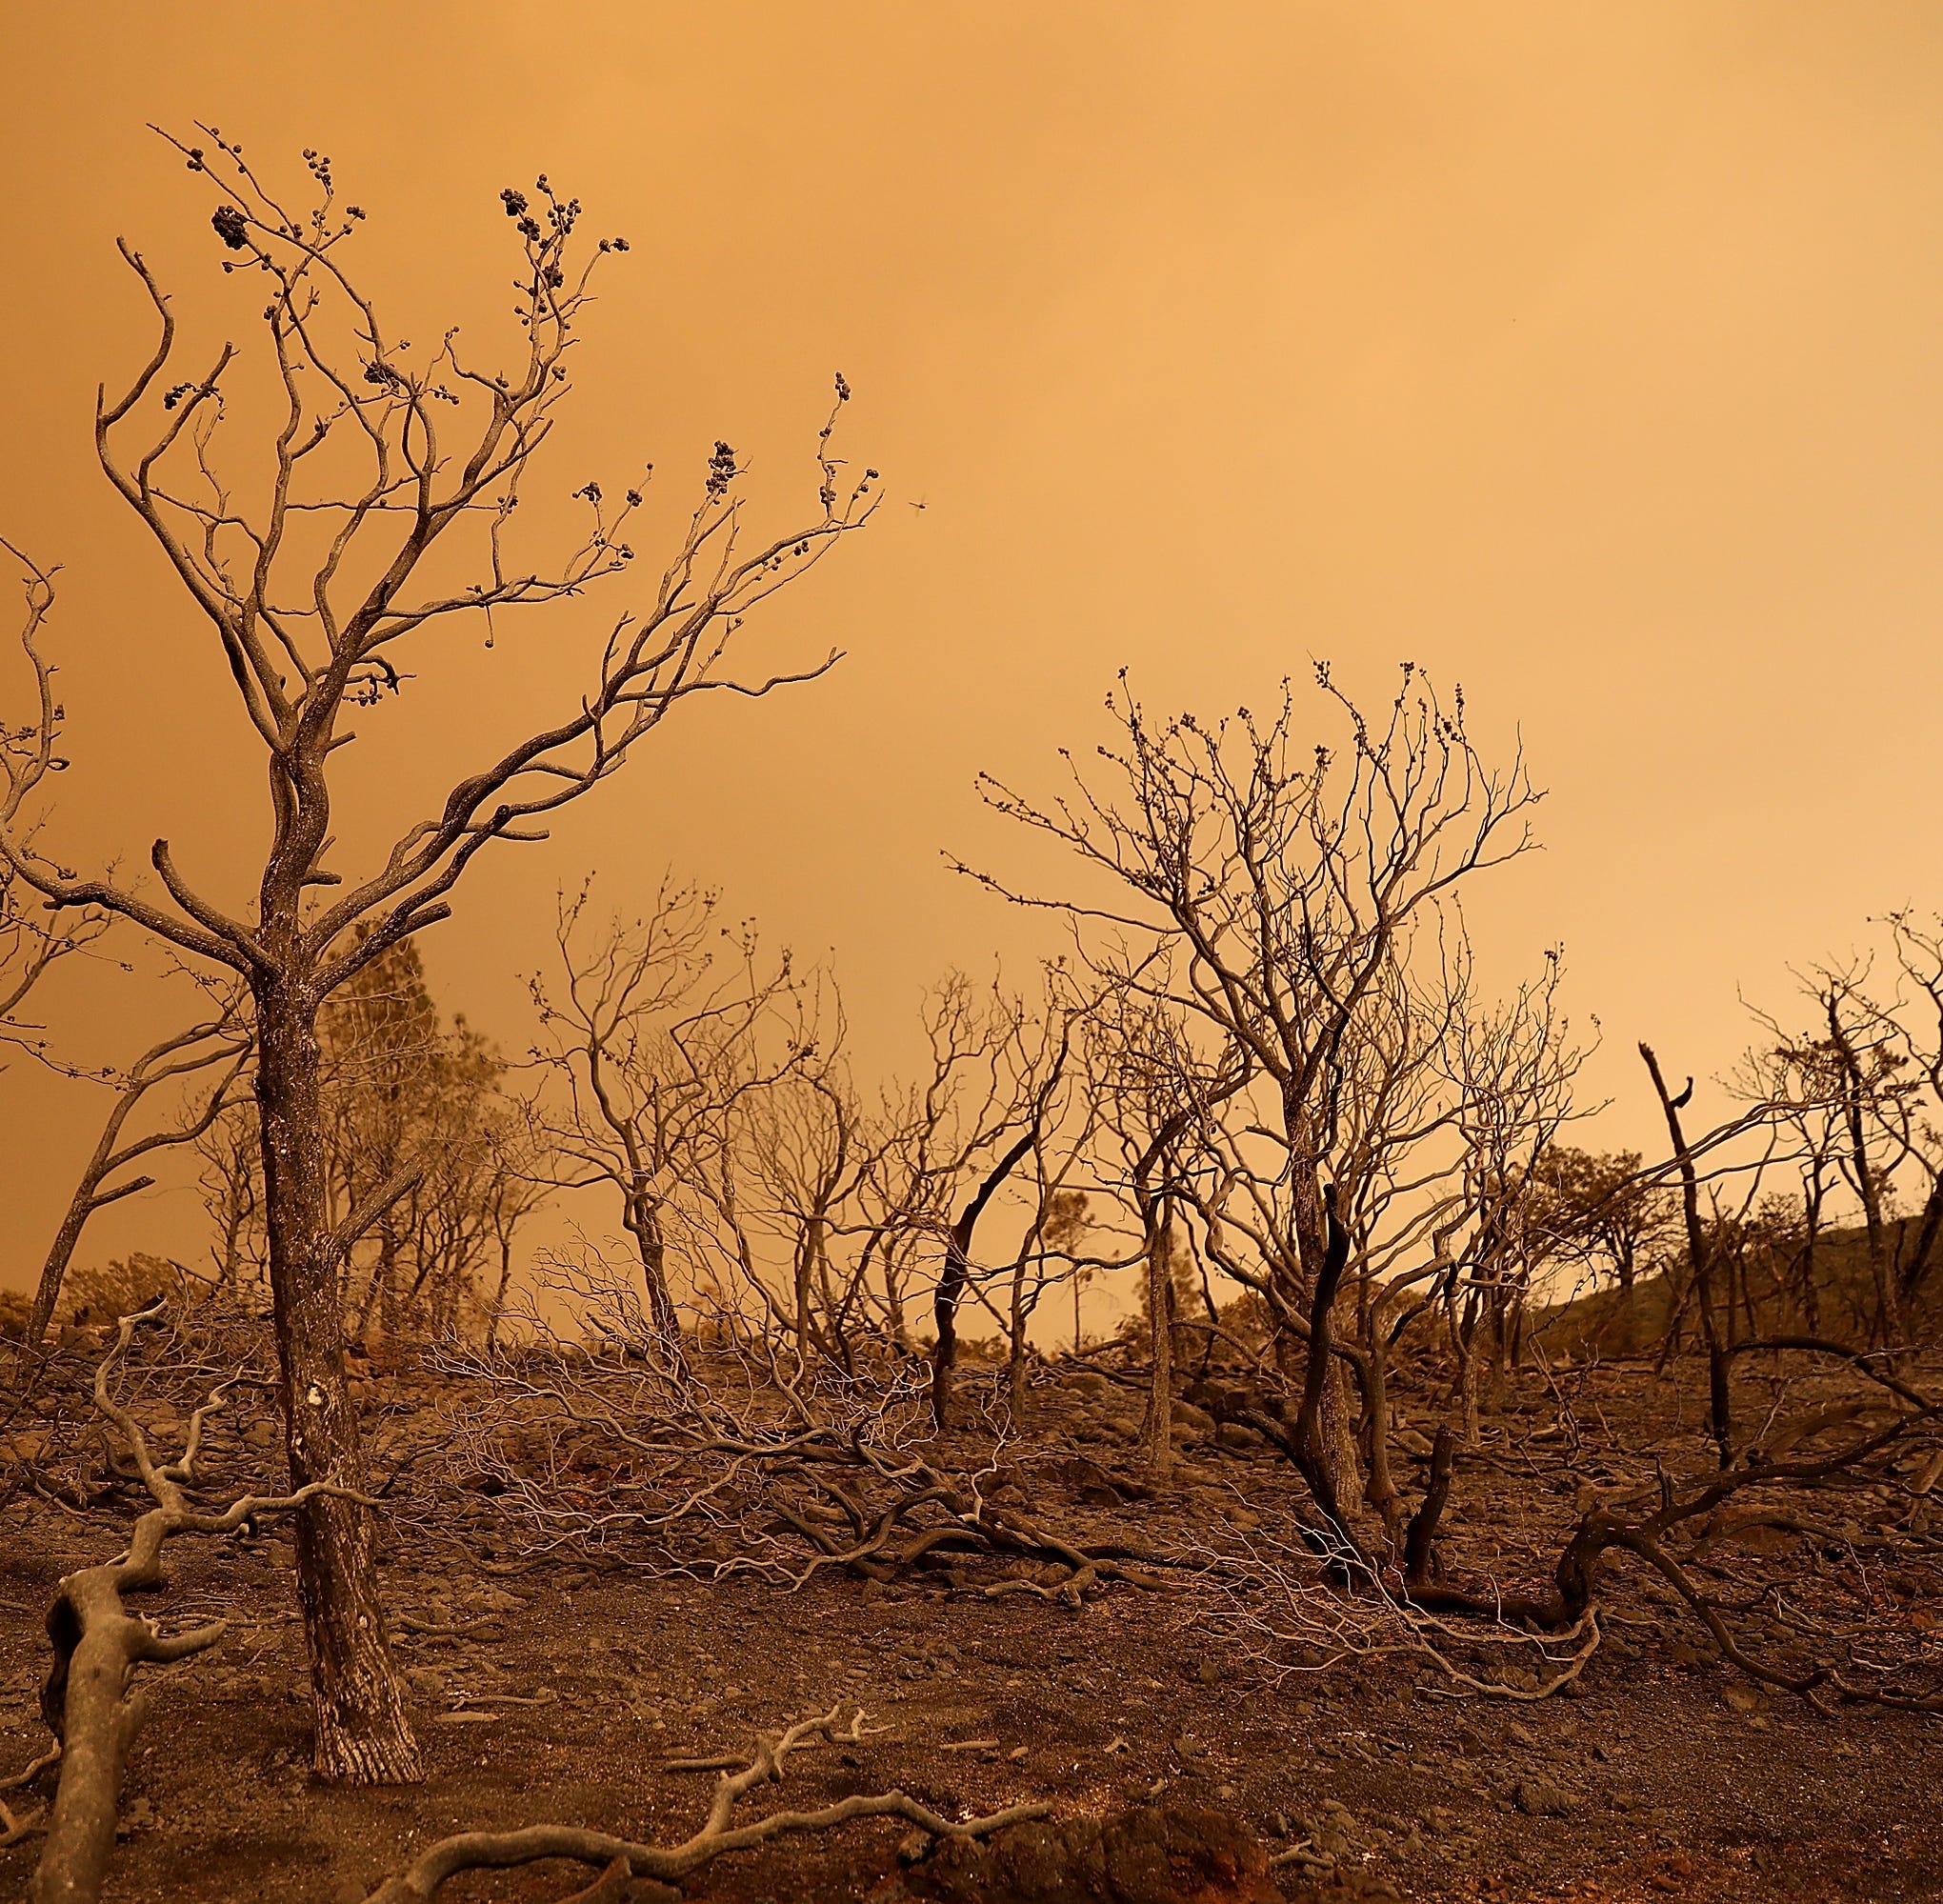 Trees burned by the Mendocino Complex fire stand in a field on August 8, 2018 near Lodoga, California. The Mendocino Complex Fire, which is made up of the River Fire and Ranch Fire, has surpassed the Thomas Fire to become the largest wildfire in Cali